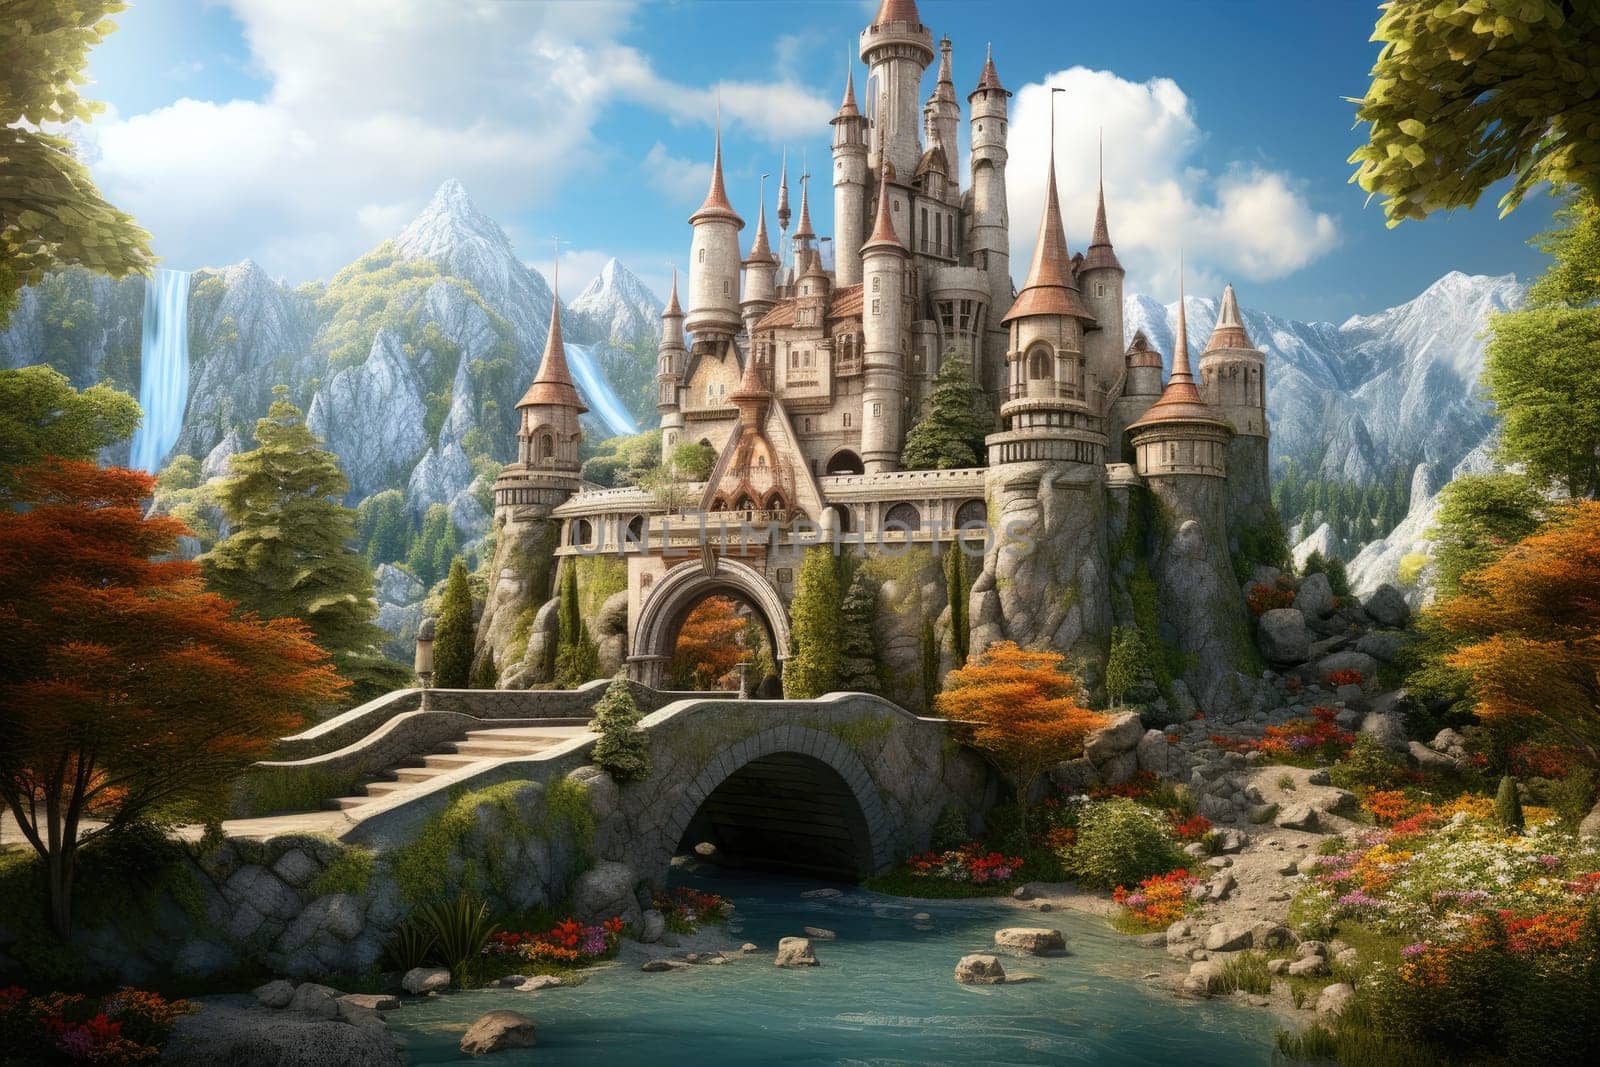 This fairytale castle is imbued with a mystical atmosphere. With its many secret passages and secret rooms, it hides incredible secrets and mysteries